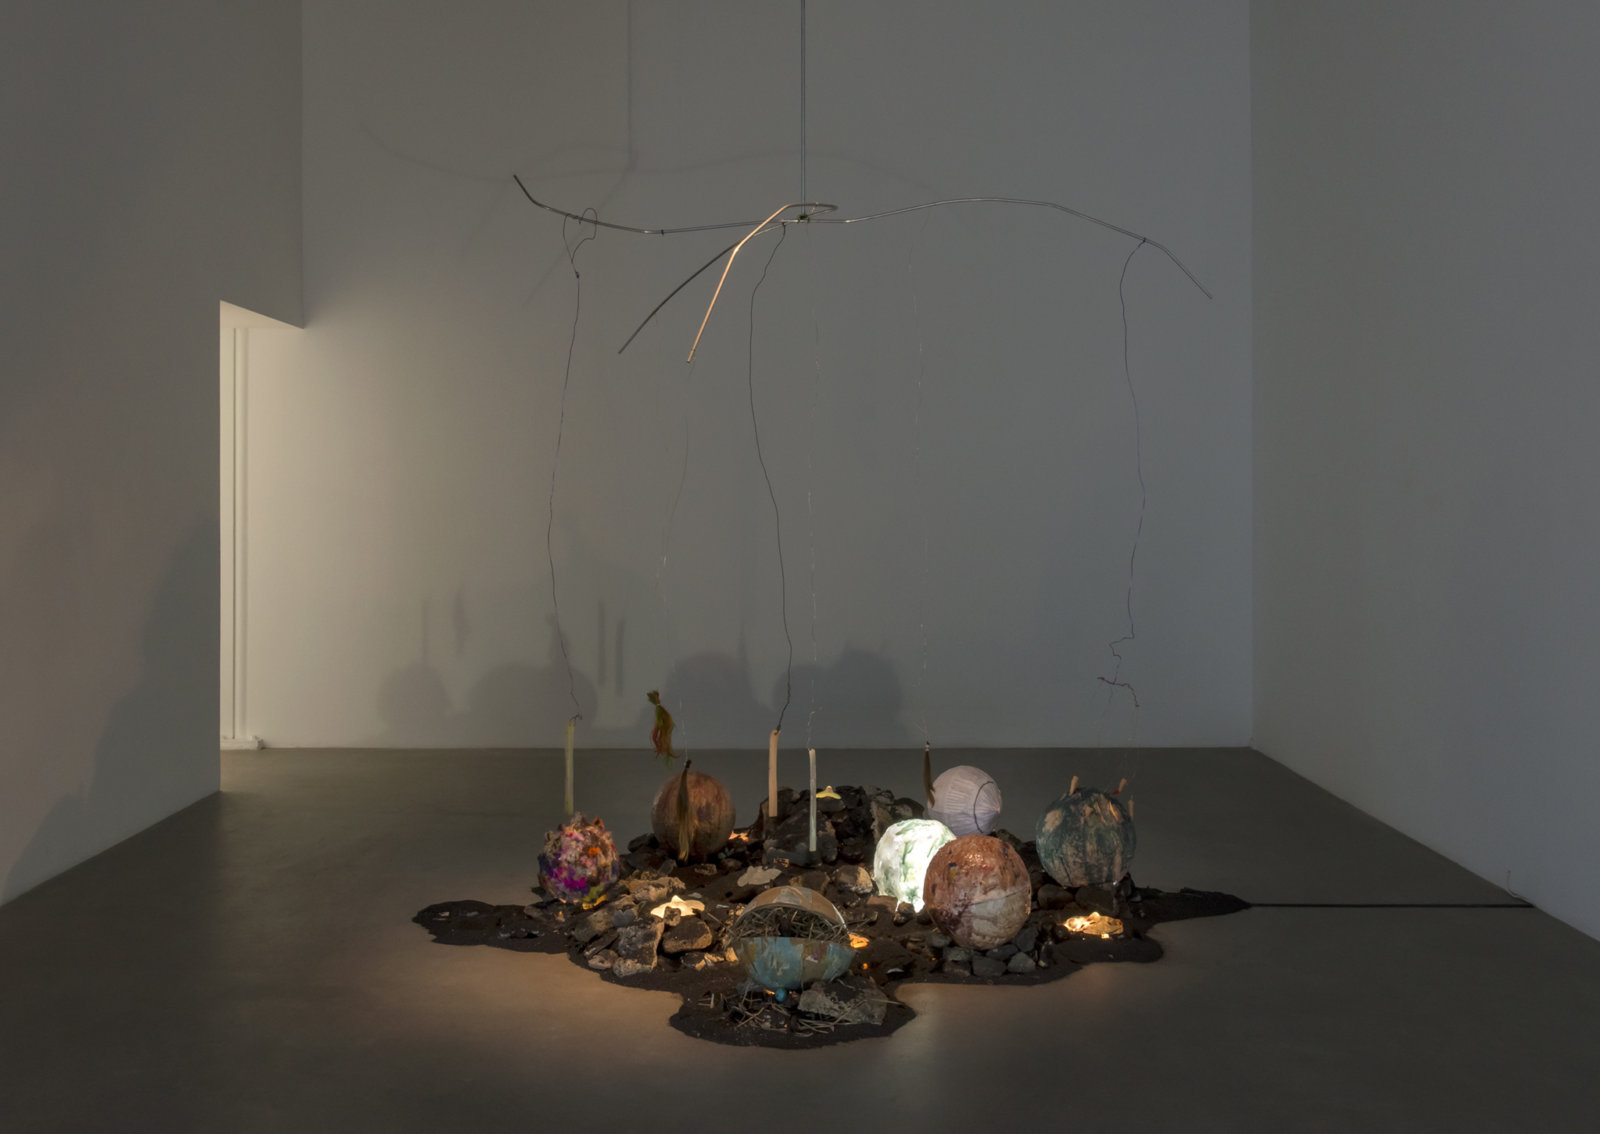 Kasper Feyrer, Device for sensing habitable zones, 2018, copper slag, latex, wax, worbla, paper, fur, feather, amaranth seed, plaster, gelatin, gummies, globe, rat toy, hay, dried weeds, silicone, wire mesh, coins, mineral rocks, fused glass faces, rocks, concrete, motor, 136 x 109 x 108 in. (354 x 277 x 274 cm)